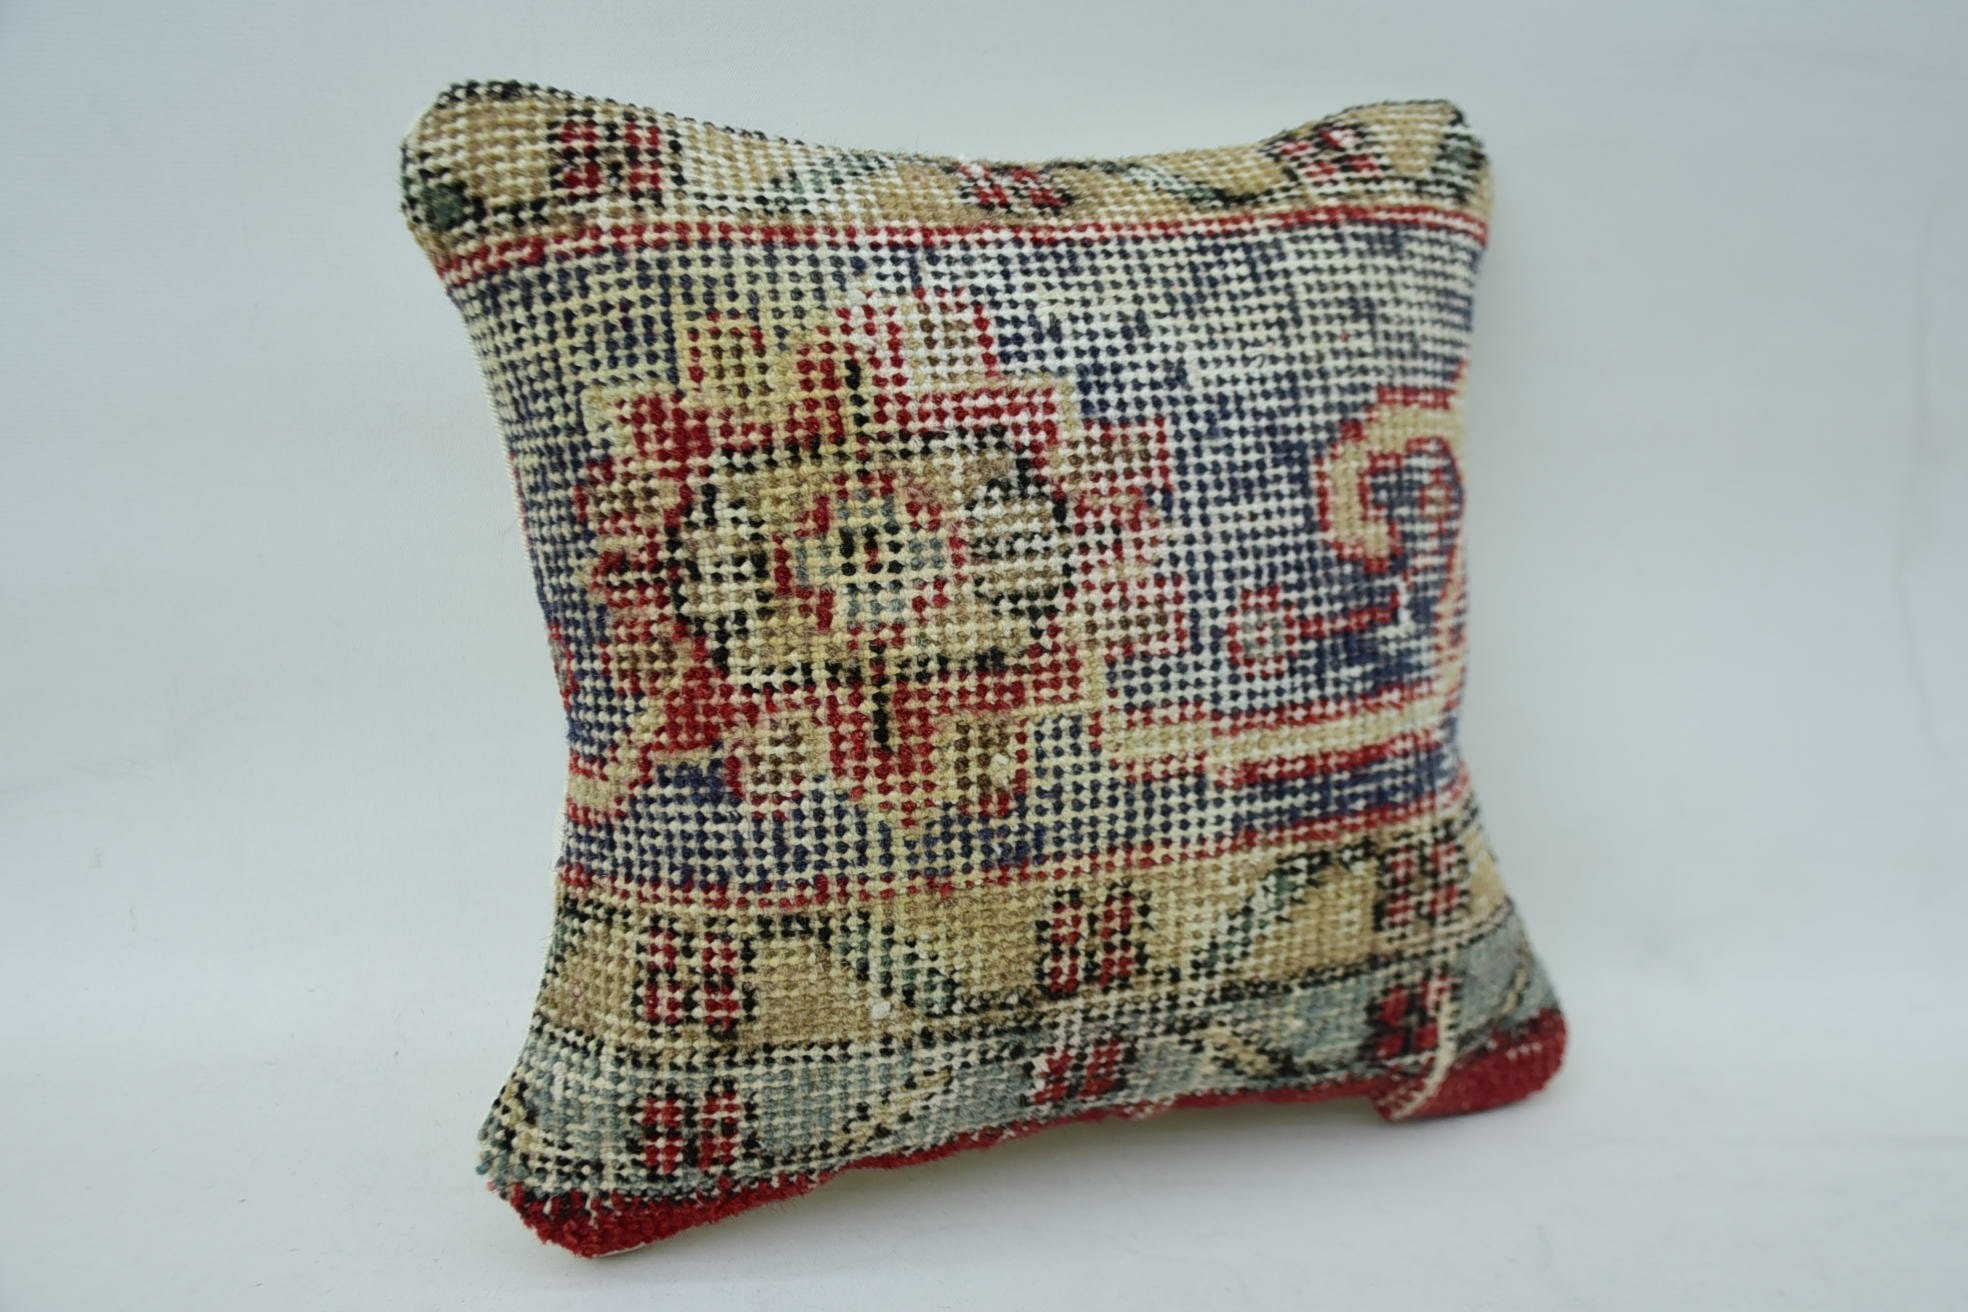 Ethnical Kilim Rug Pillow, Handmade Cushion Cover, 12"x12" Red Pillow Cover, Home Decor Pillow, Turkish Kilim Pillow